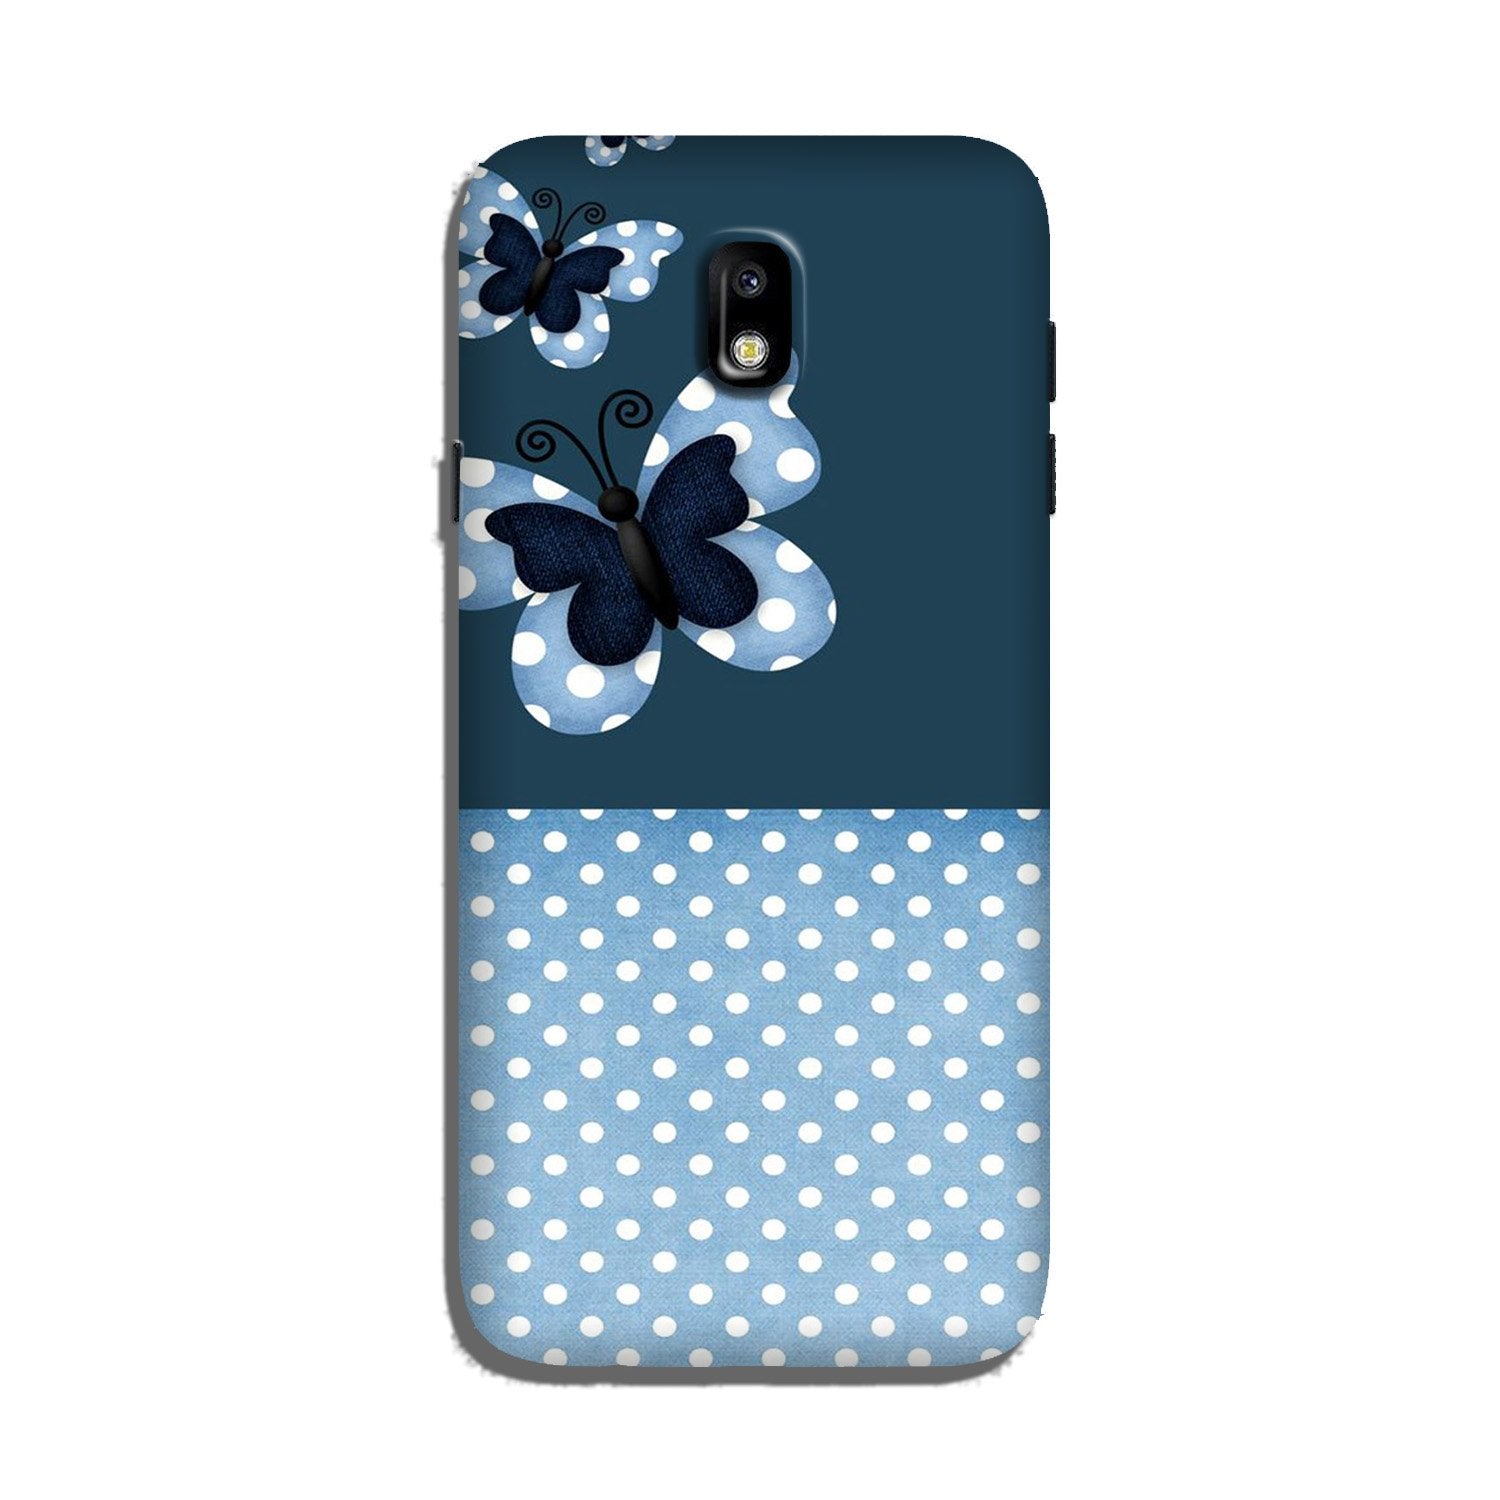 White dots Butterfly Case for Galaxy J5 Pro